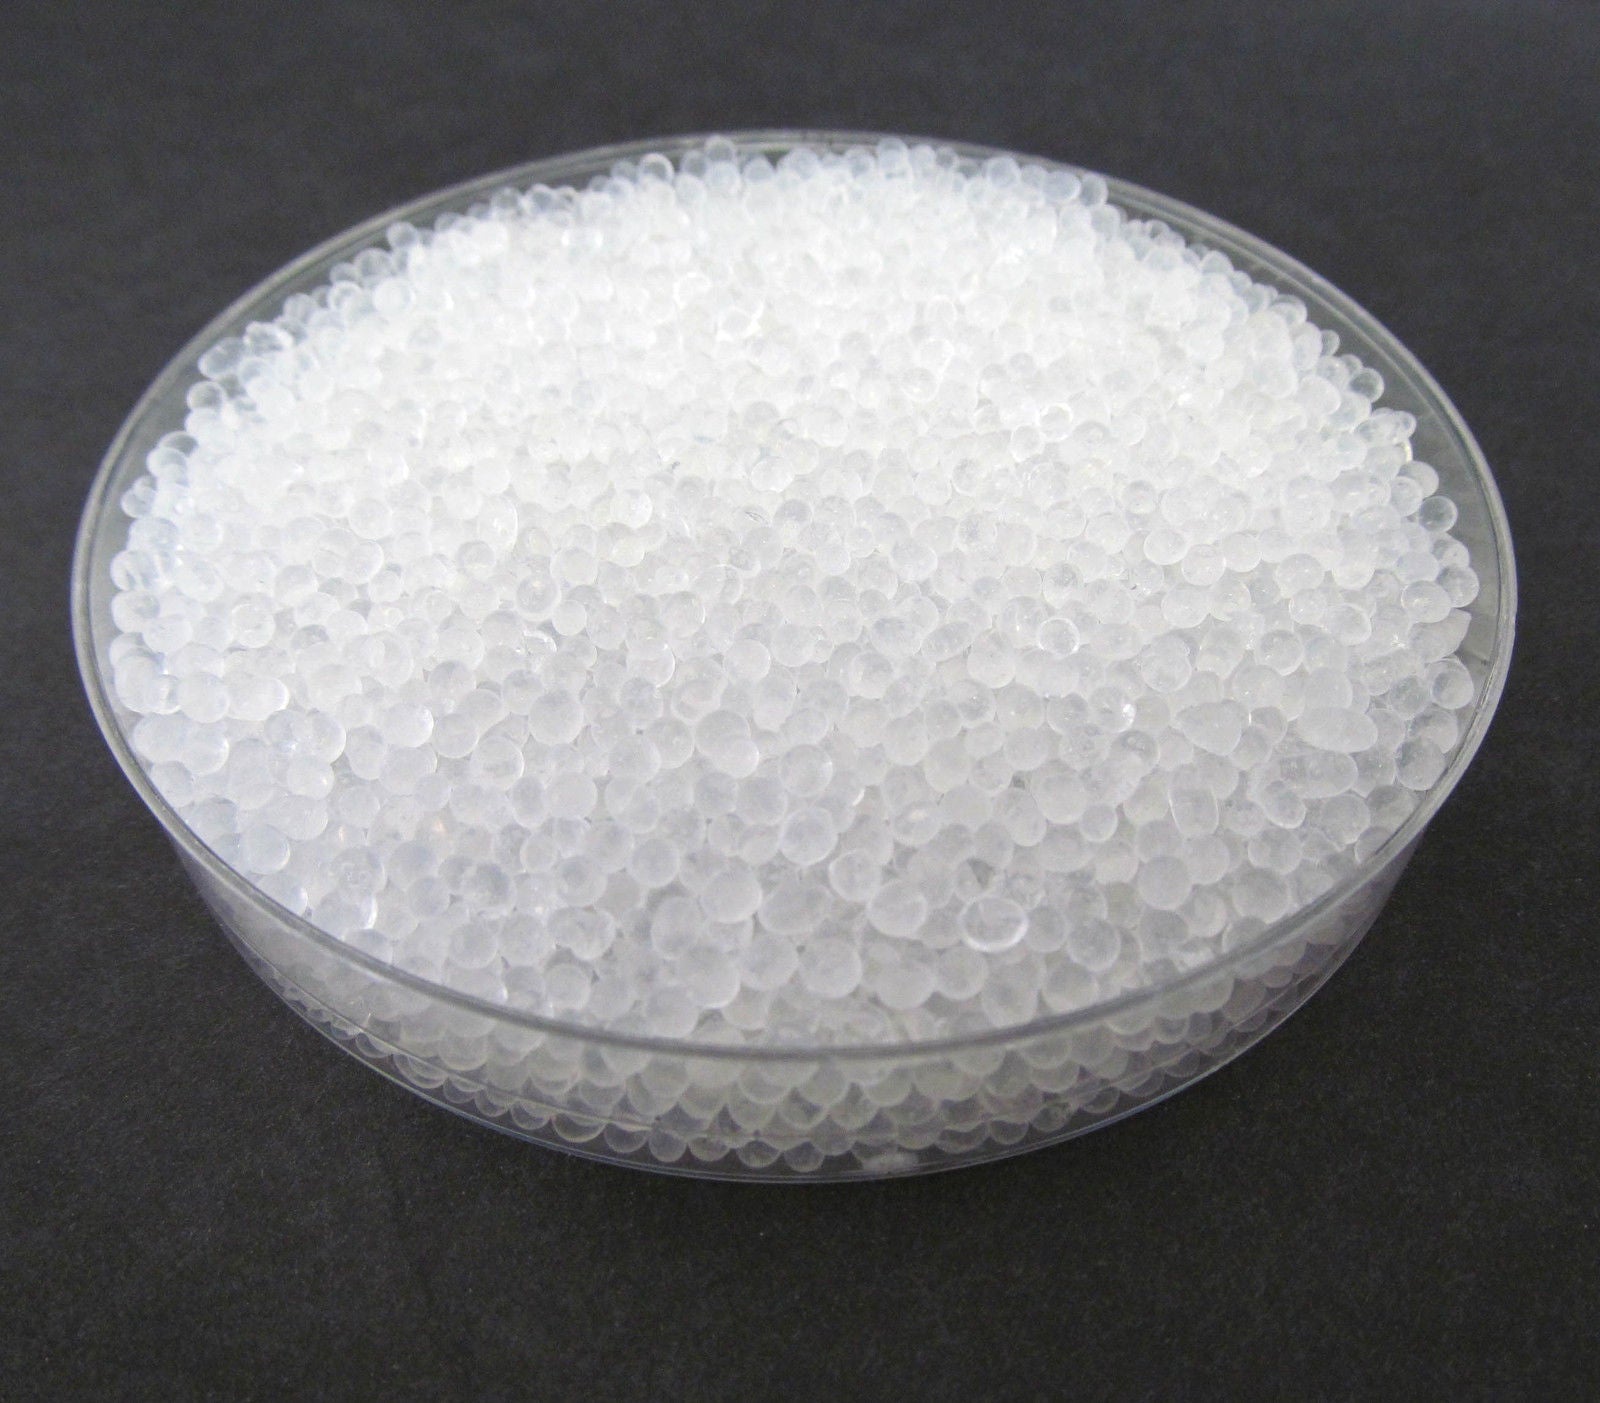 5 LBS Dry & Dry Premium White Silica Gel Beads (Industry Standard 2-4 mm)  - 5 LBS Reusable